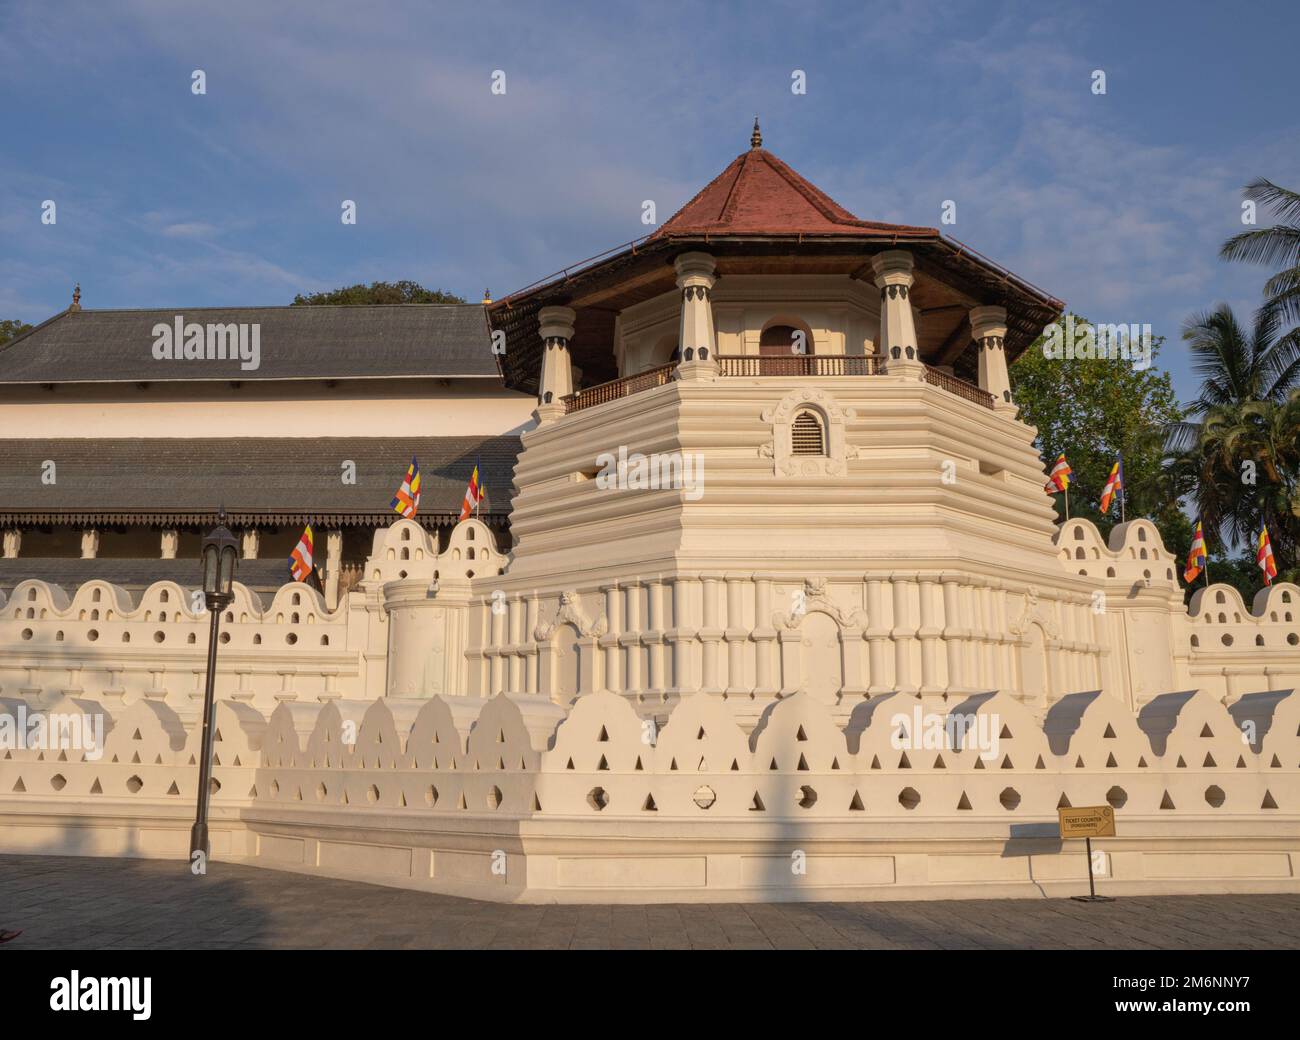 Kandy, sri lanka, Temple of the sacred tooth relic.it's located in the royal palace complex of the former kingdom of kandy. Stock Photo